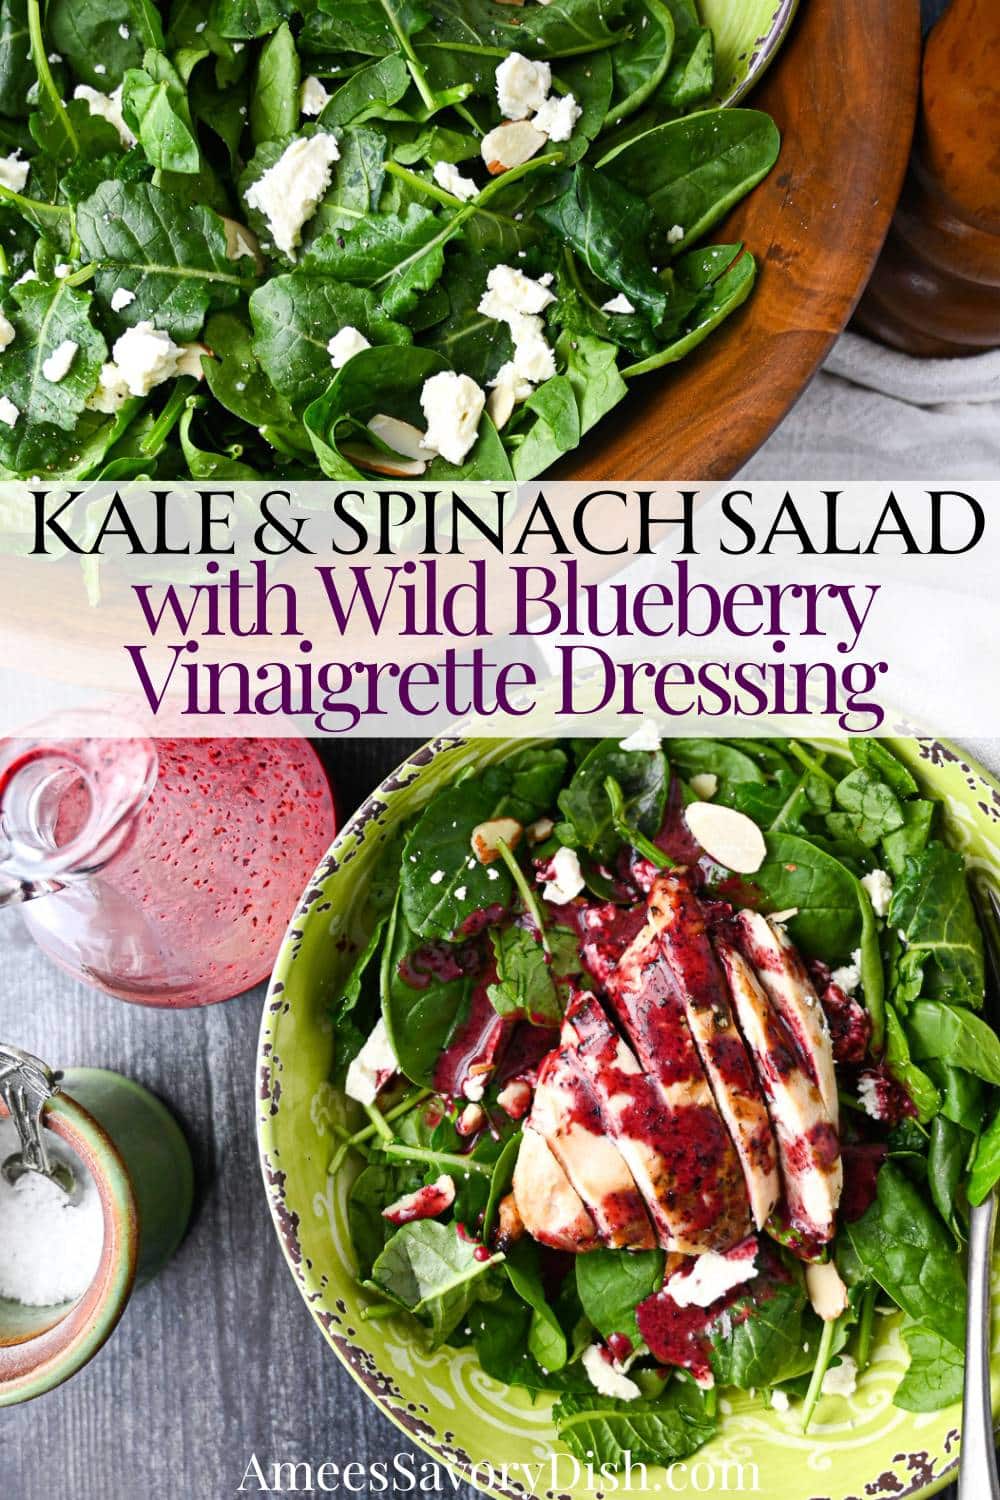 Take your superfood salad game to the next level with this Kale and Spinach Salad. It features a mesclun of leafy greens topped with crumbled goat cheese and almonds, dressed in wild blueberry vinaigrette via @Ameessavorydish